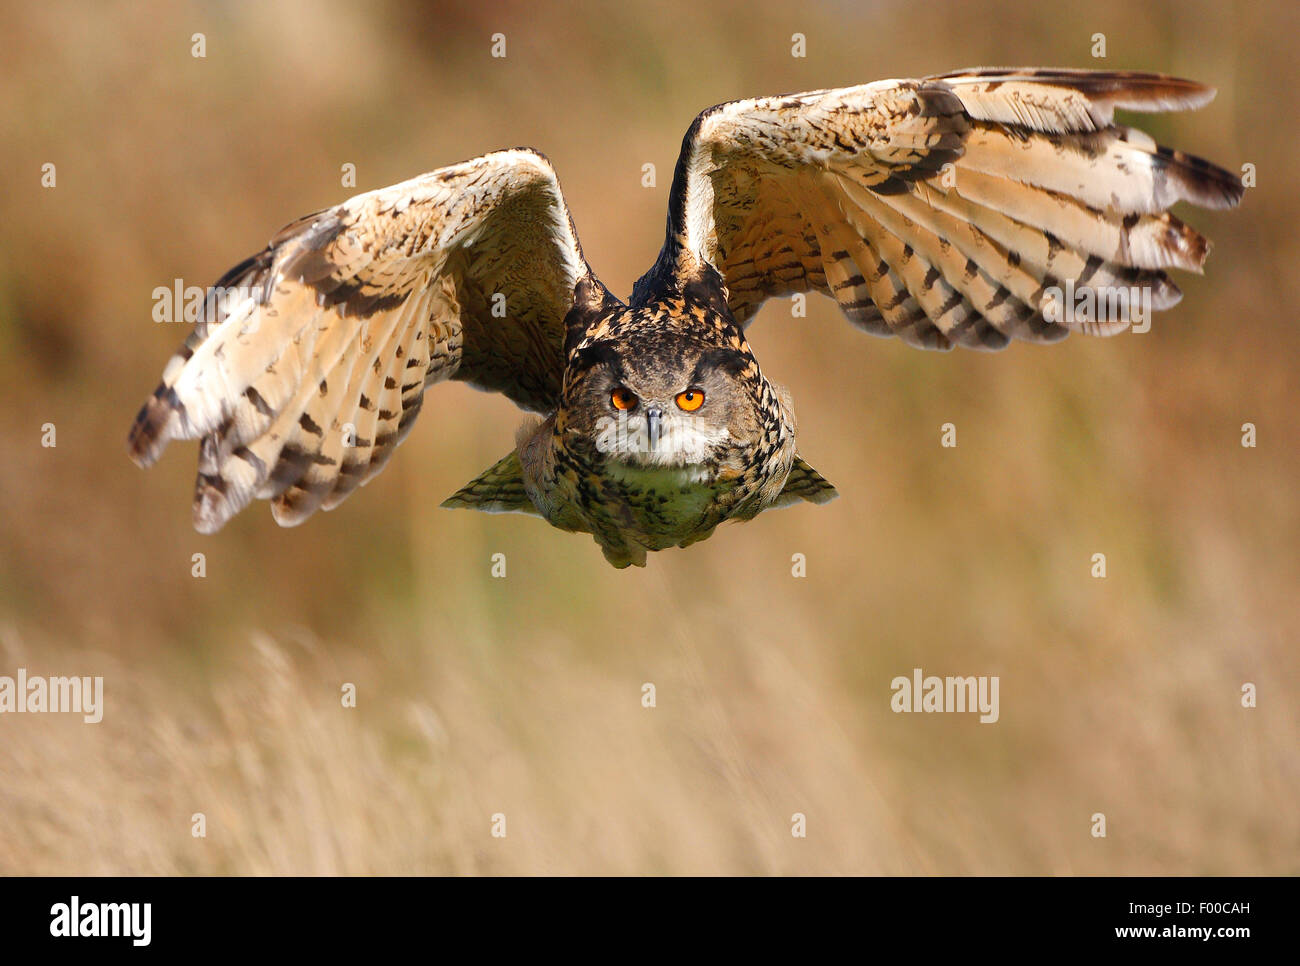 northern eagle owl (Bubo bubo), in flight over dried grass, Belgium Stock Photo